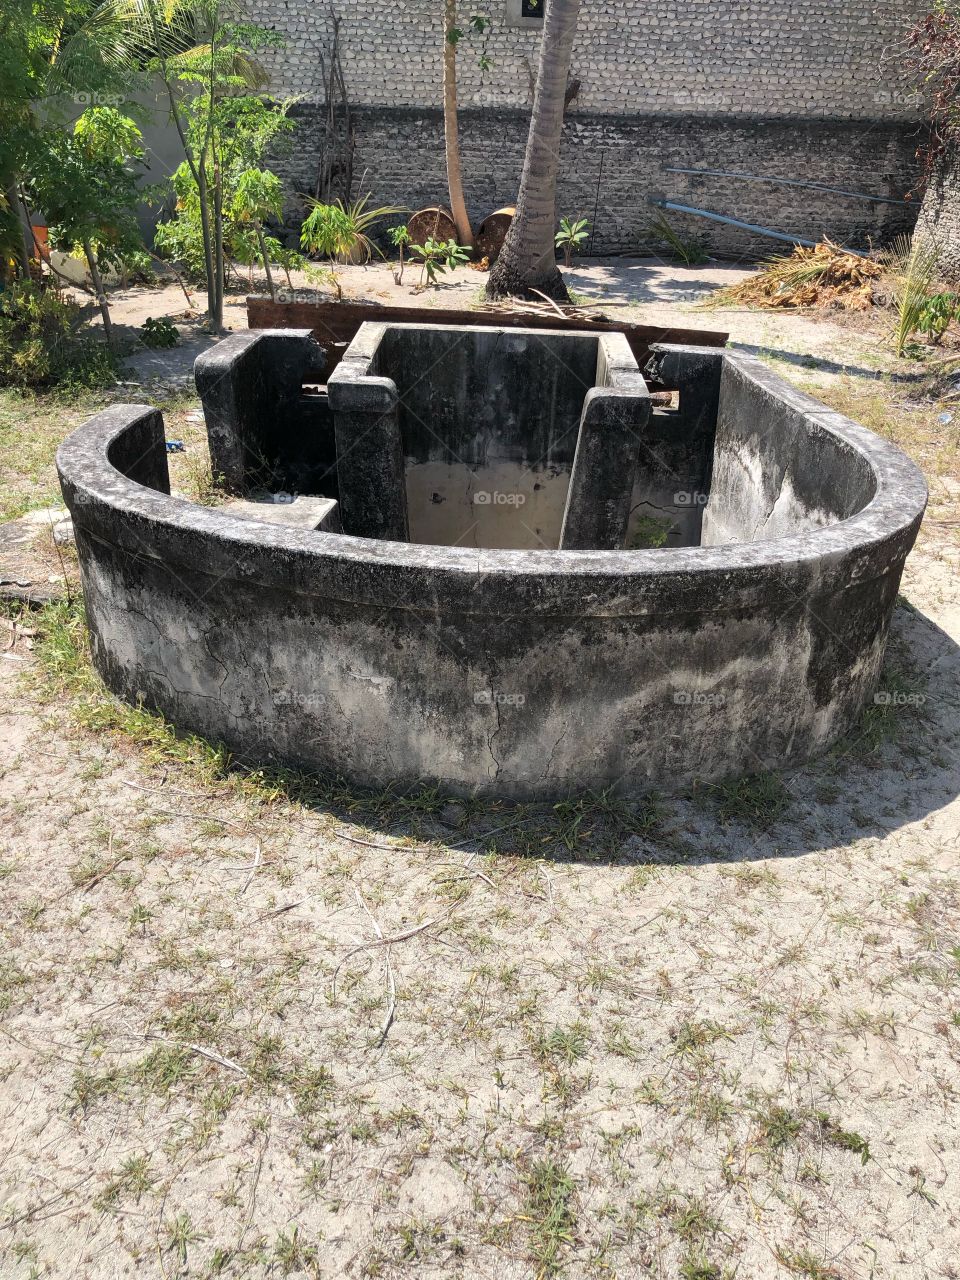 A nice architecture of my 3rd great grandparents. As on the calculation of my 3rd great grandparents birth day as of now, this well was more than 100 years old. They use this  well to take shower.